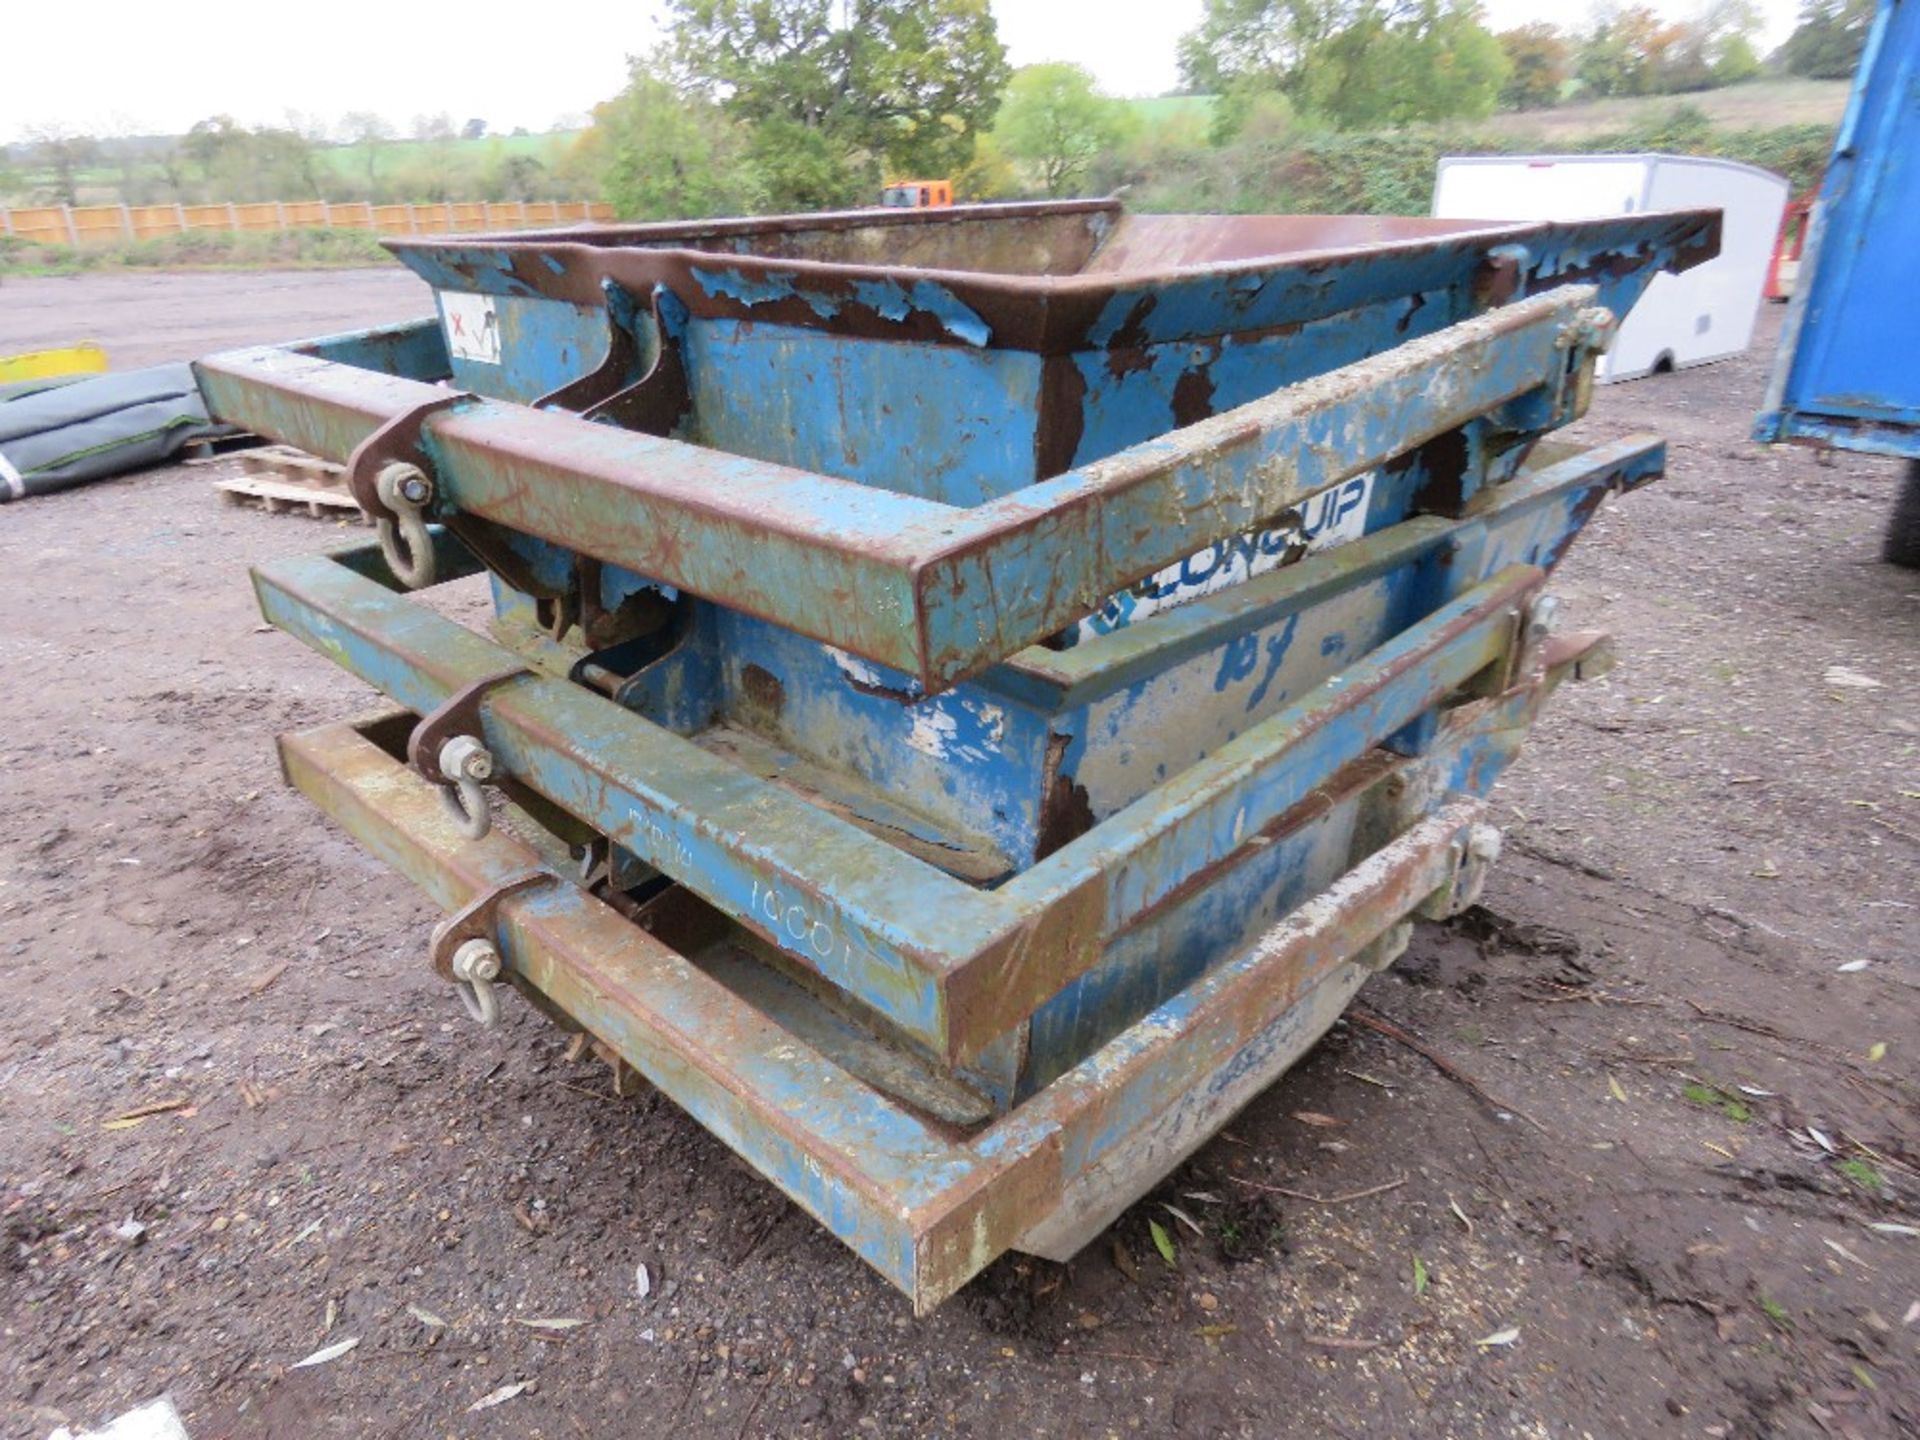 3 X CONQUIP 1000LITRE BOAT SKIPS. - Image 4 of 5